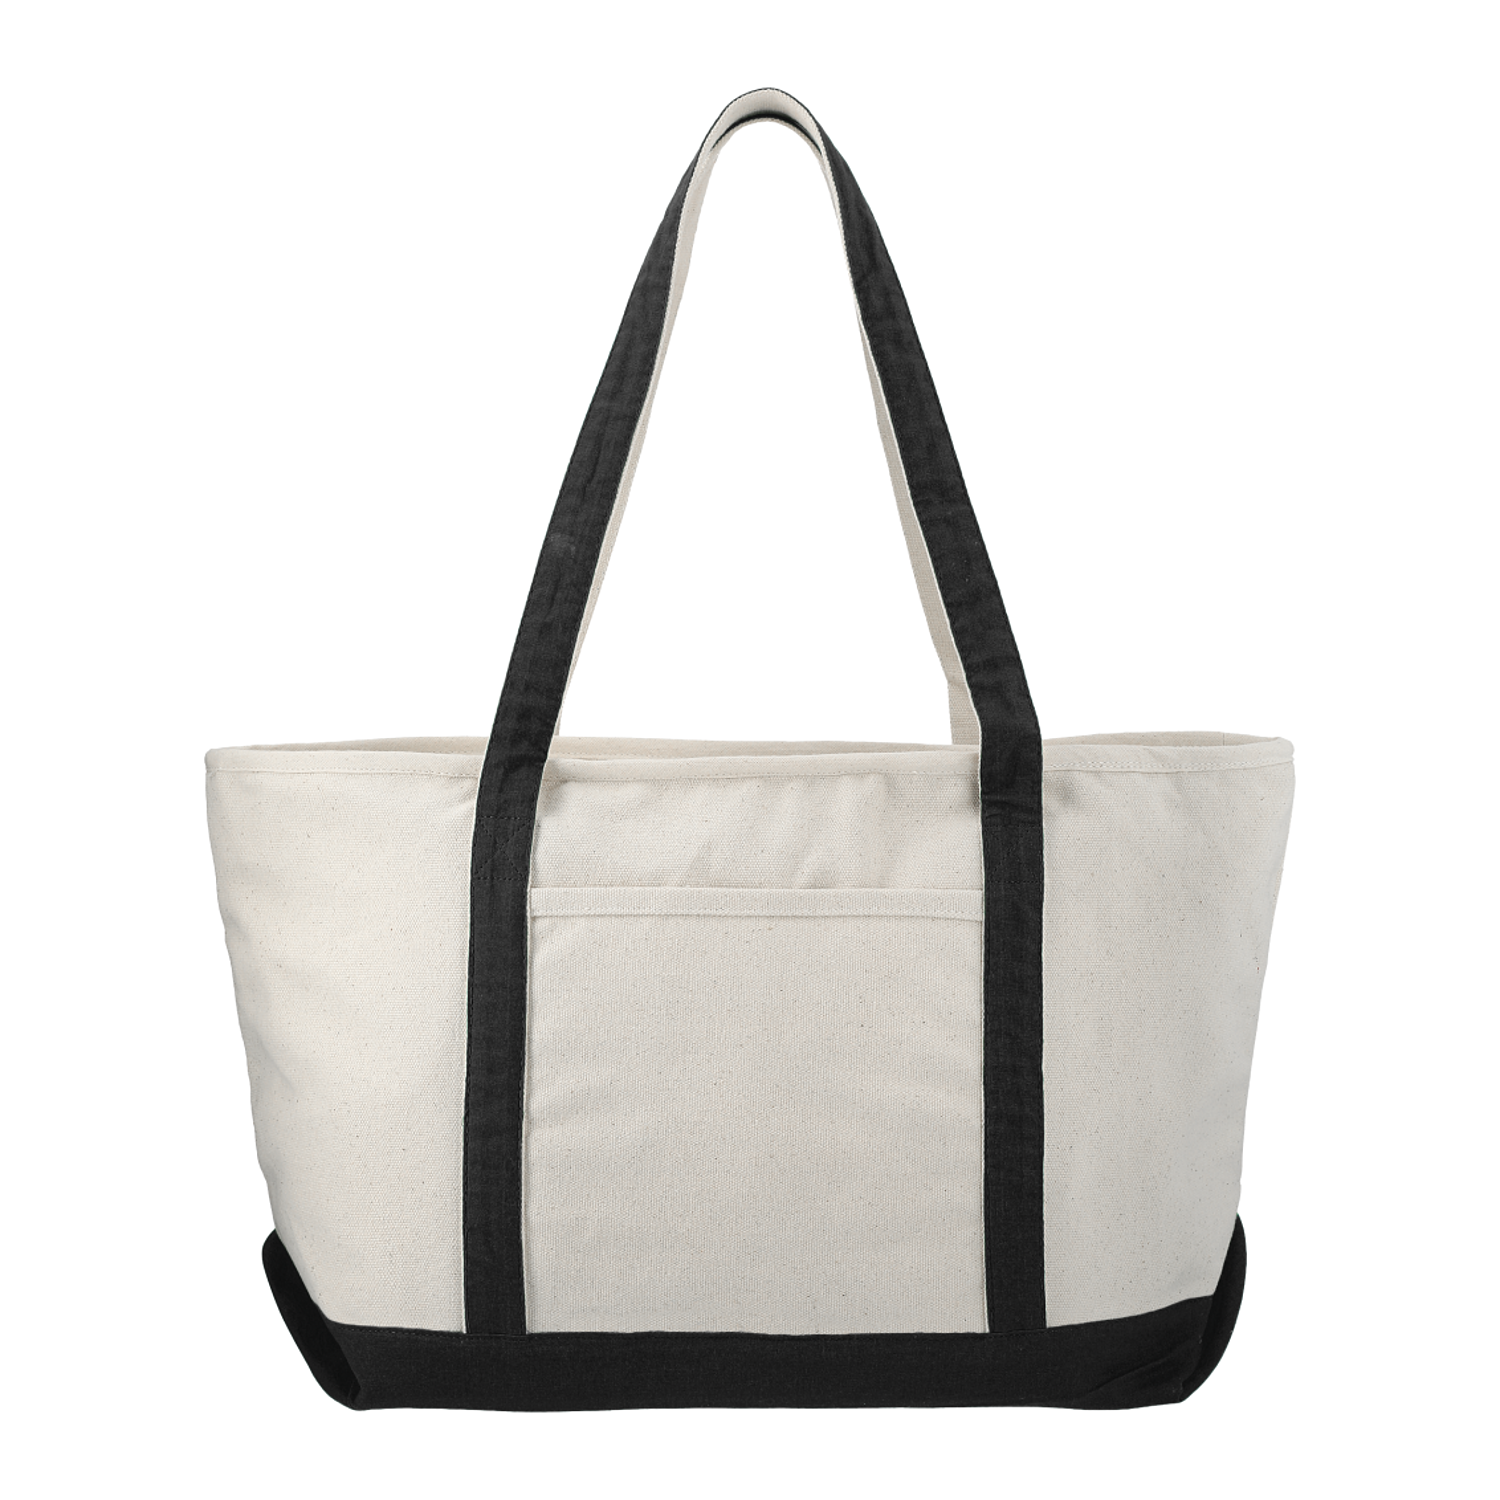 LEEDS 7900-31 - Baltic 18oz Cotton Canvas Zippered Boat Tote